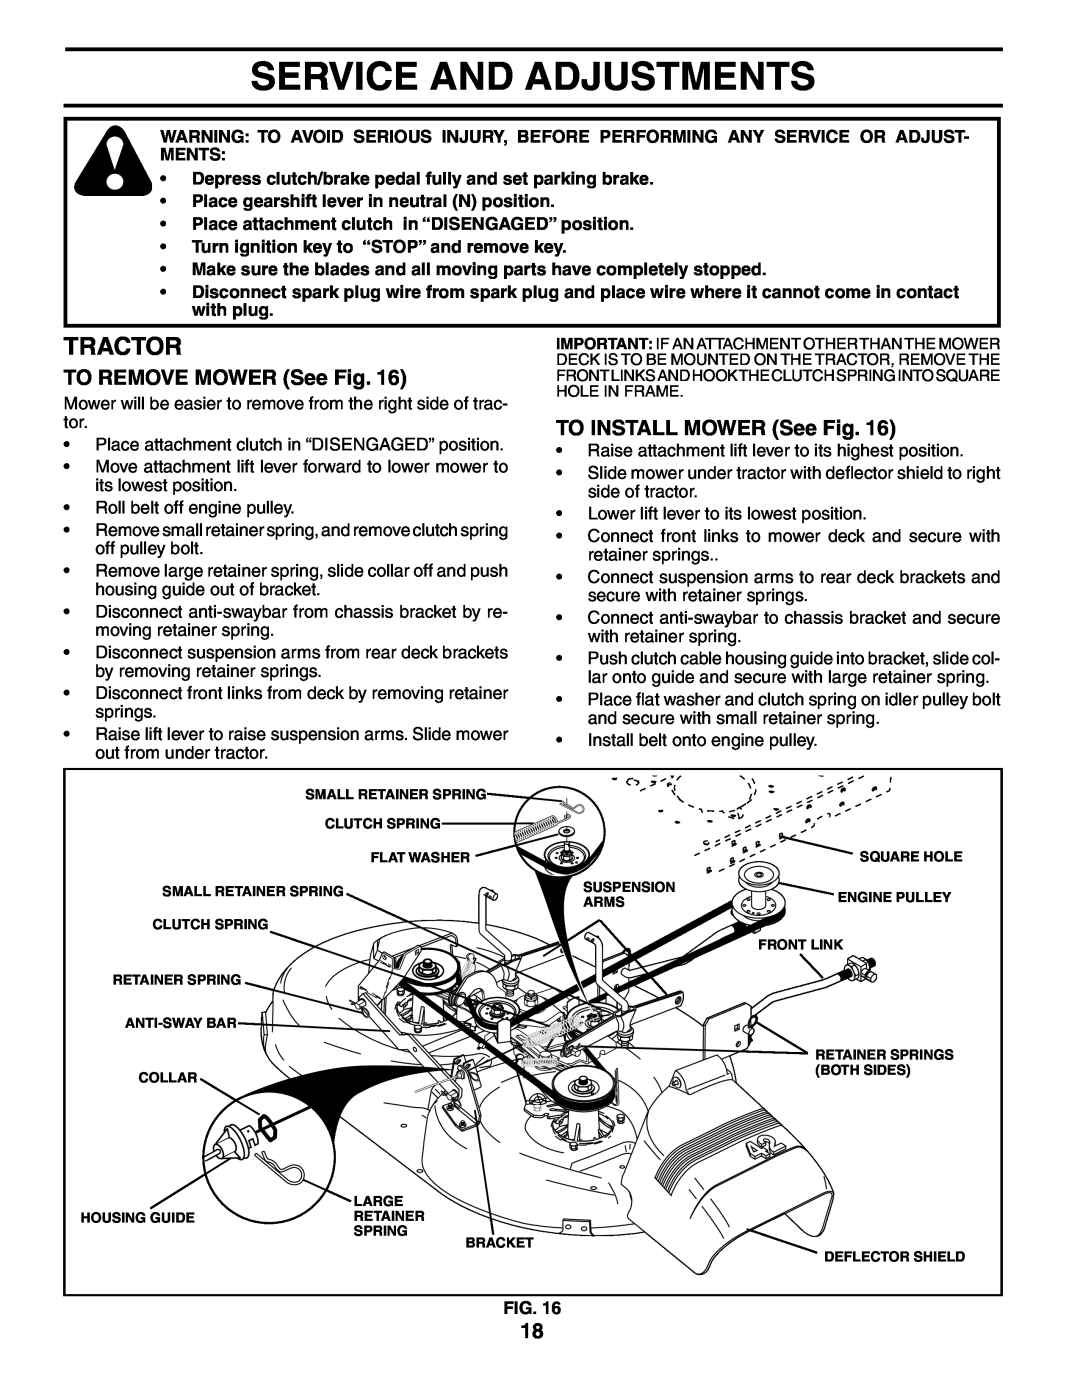 Poulan 954569554, 184518 manual Service And Adjustments, TO REMOVE MOWER See Fig, TO INSTALL MOWER See Fig, Tractor 